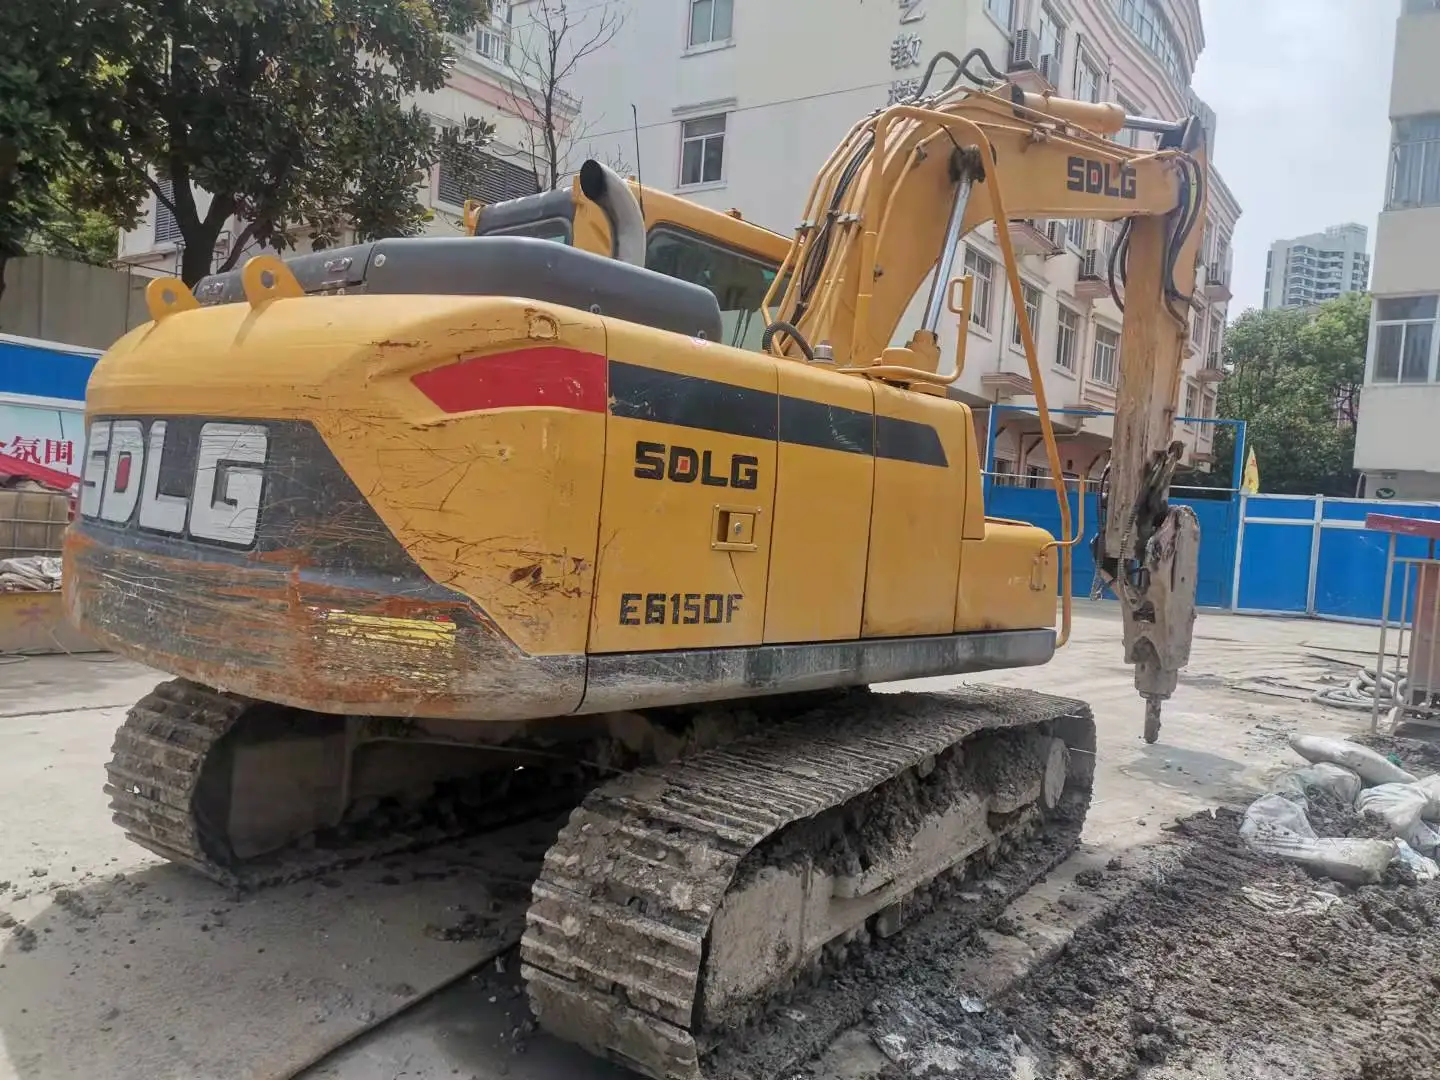 China SDLG E6150F used excavator for sale in malaysia E6125F E6135F digger excavating equipment